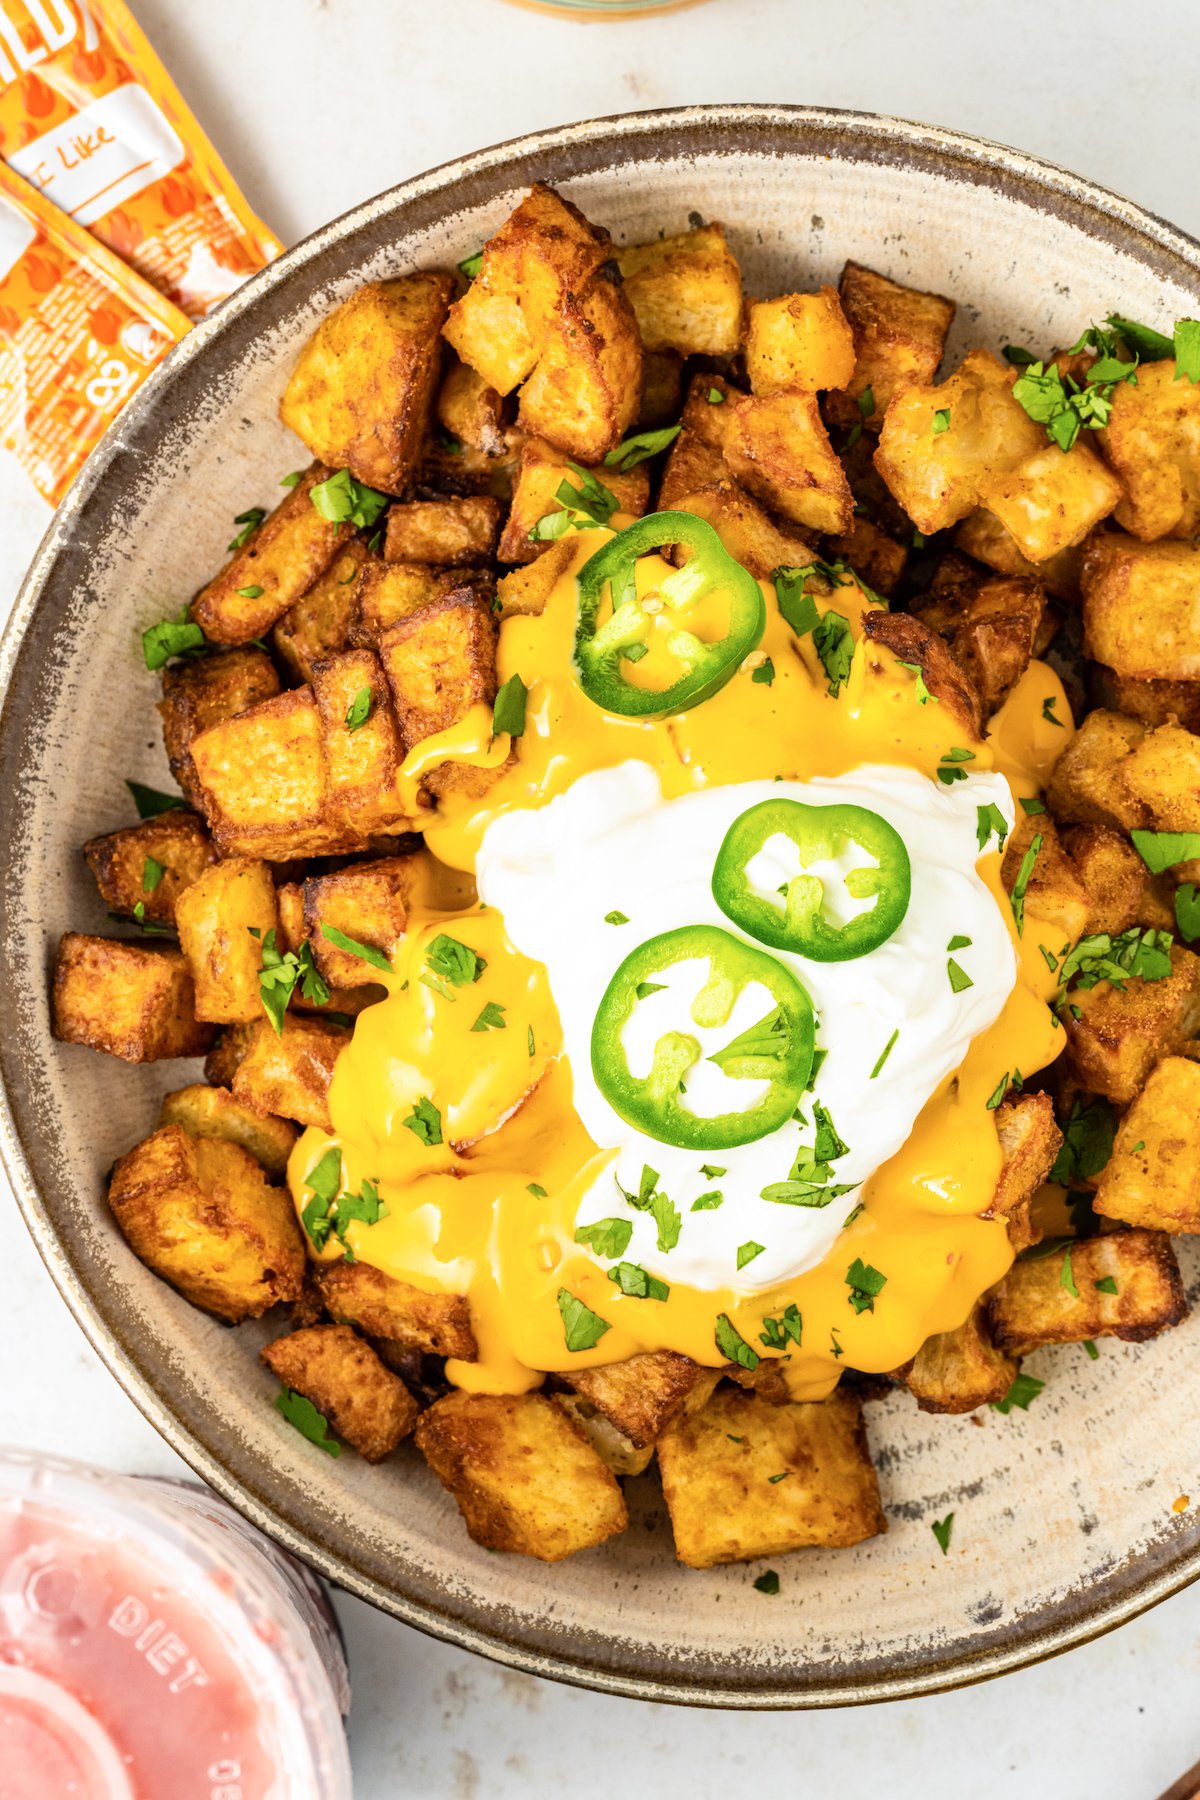 A serving bowl filled with chopped seasoned fiesta potatoes covered in nacho cheese and sour cream. Slices of jalapeno and chives on top.